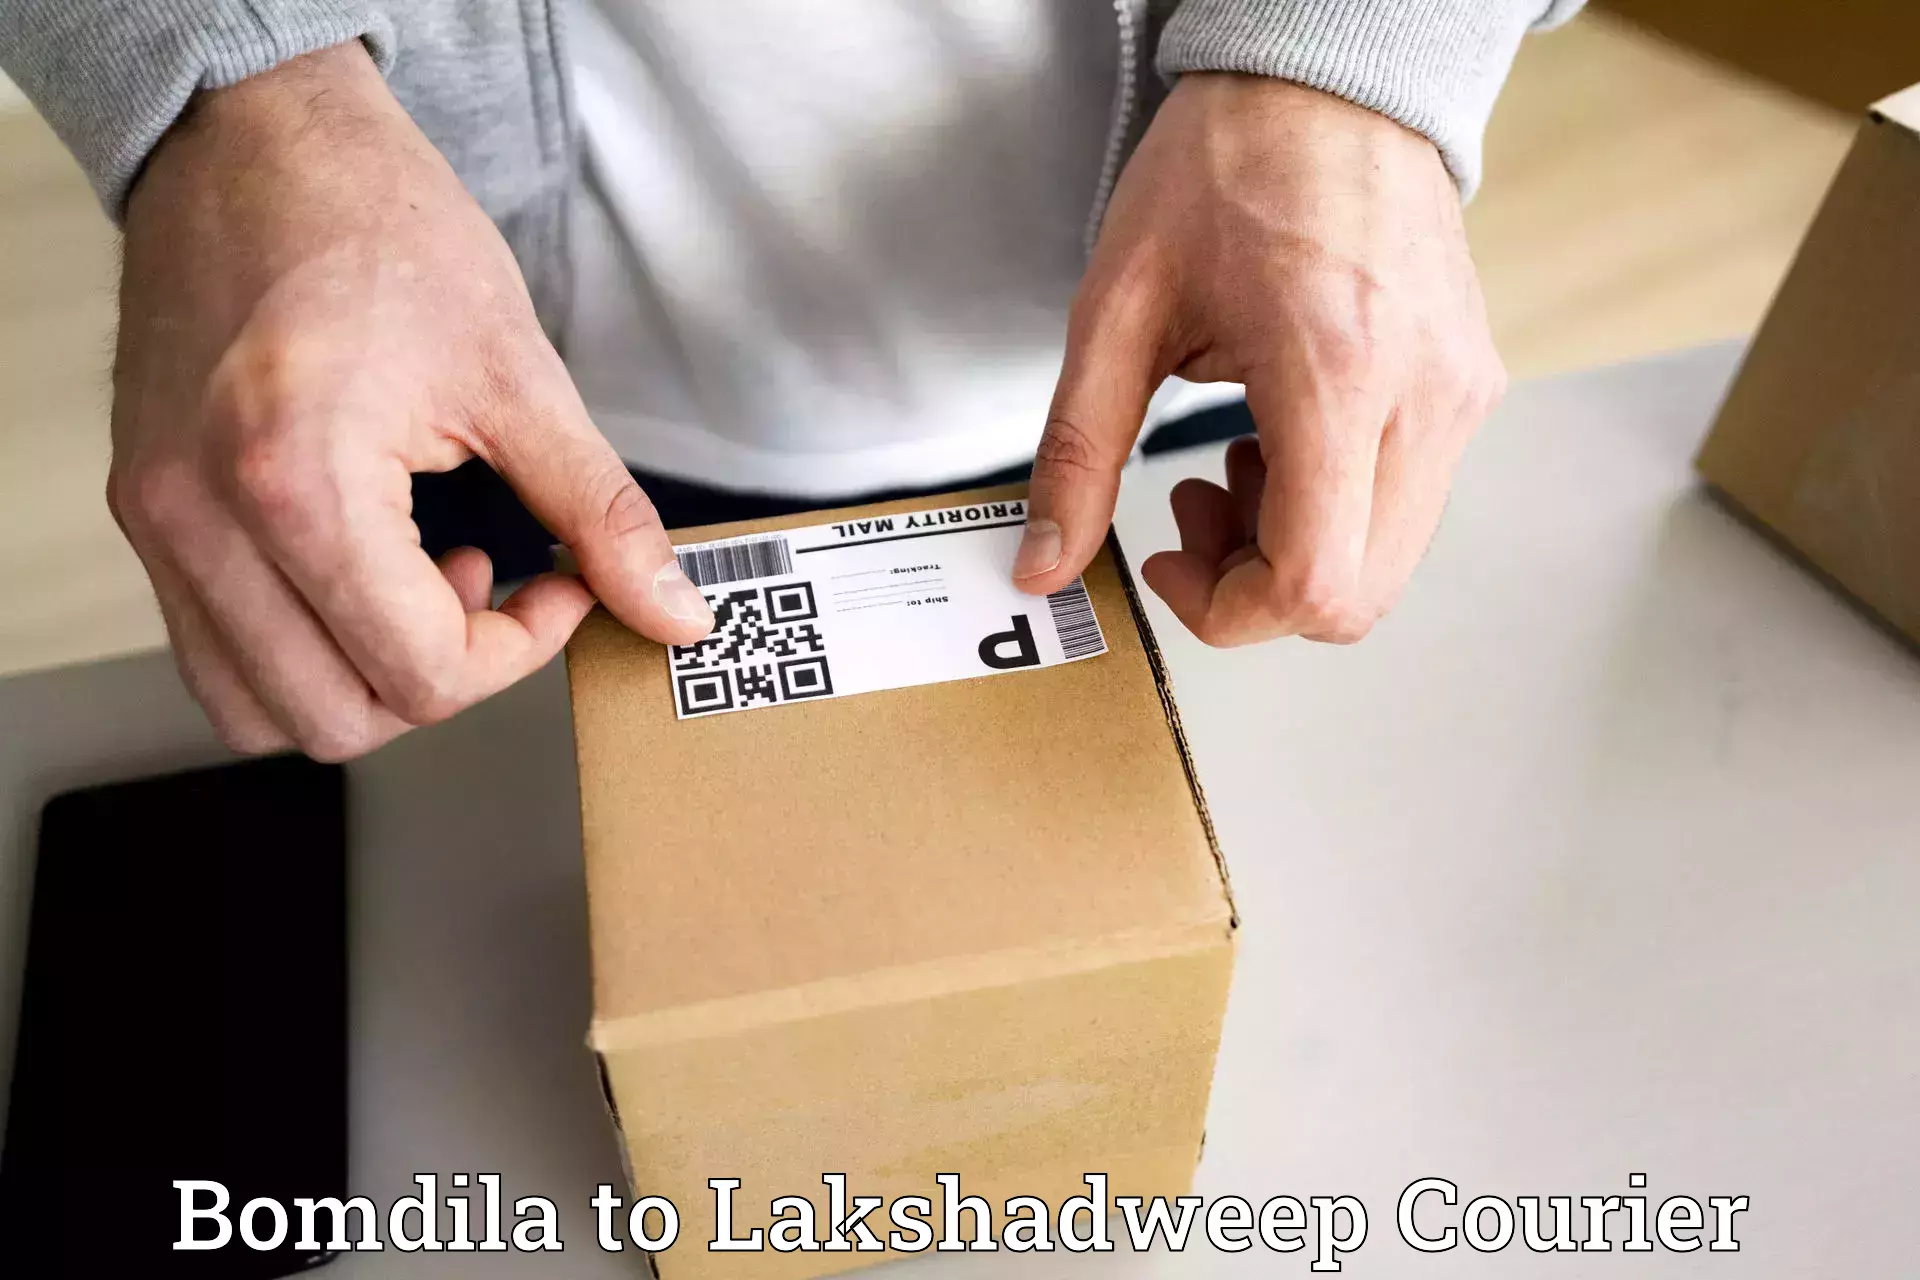 Easy access courier services Bomdila to Lakshadweep